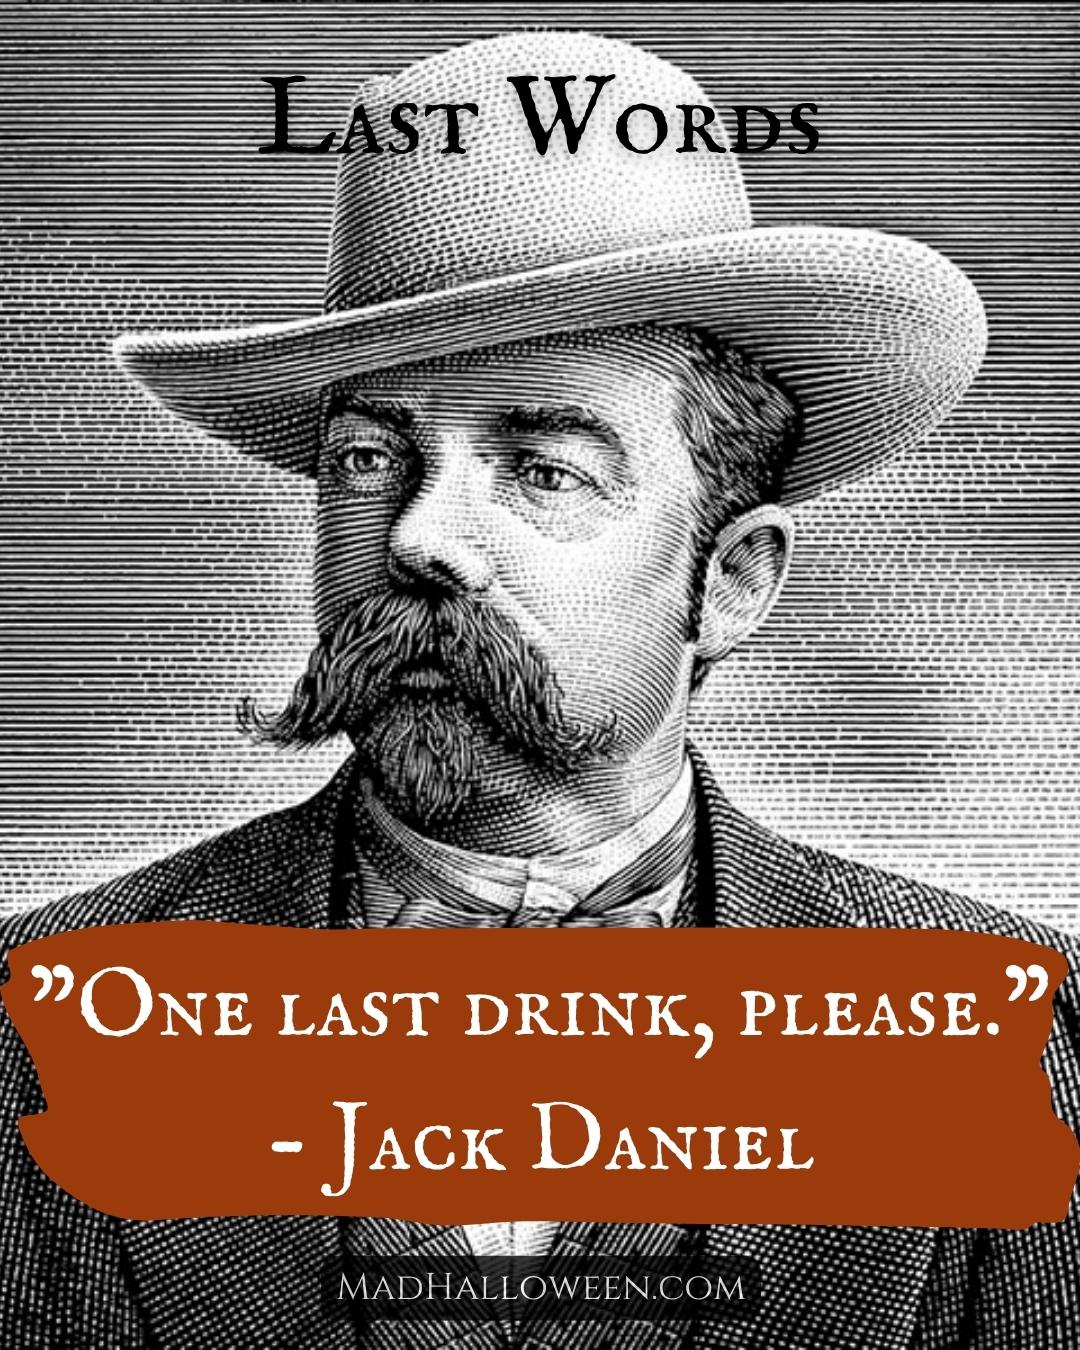 Famous Last Words Quotes of the Departed - Jack Daniel Man - Mad Halloween